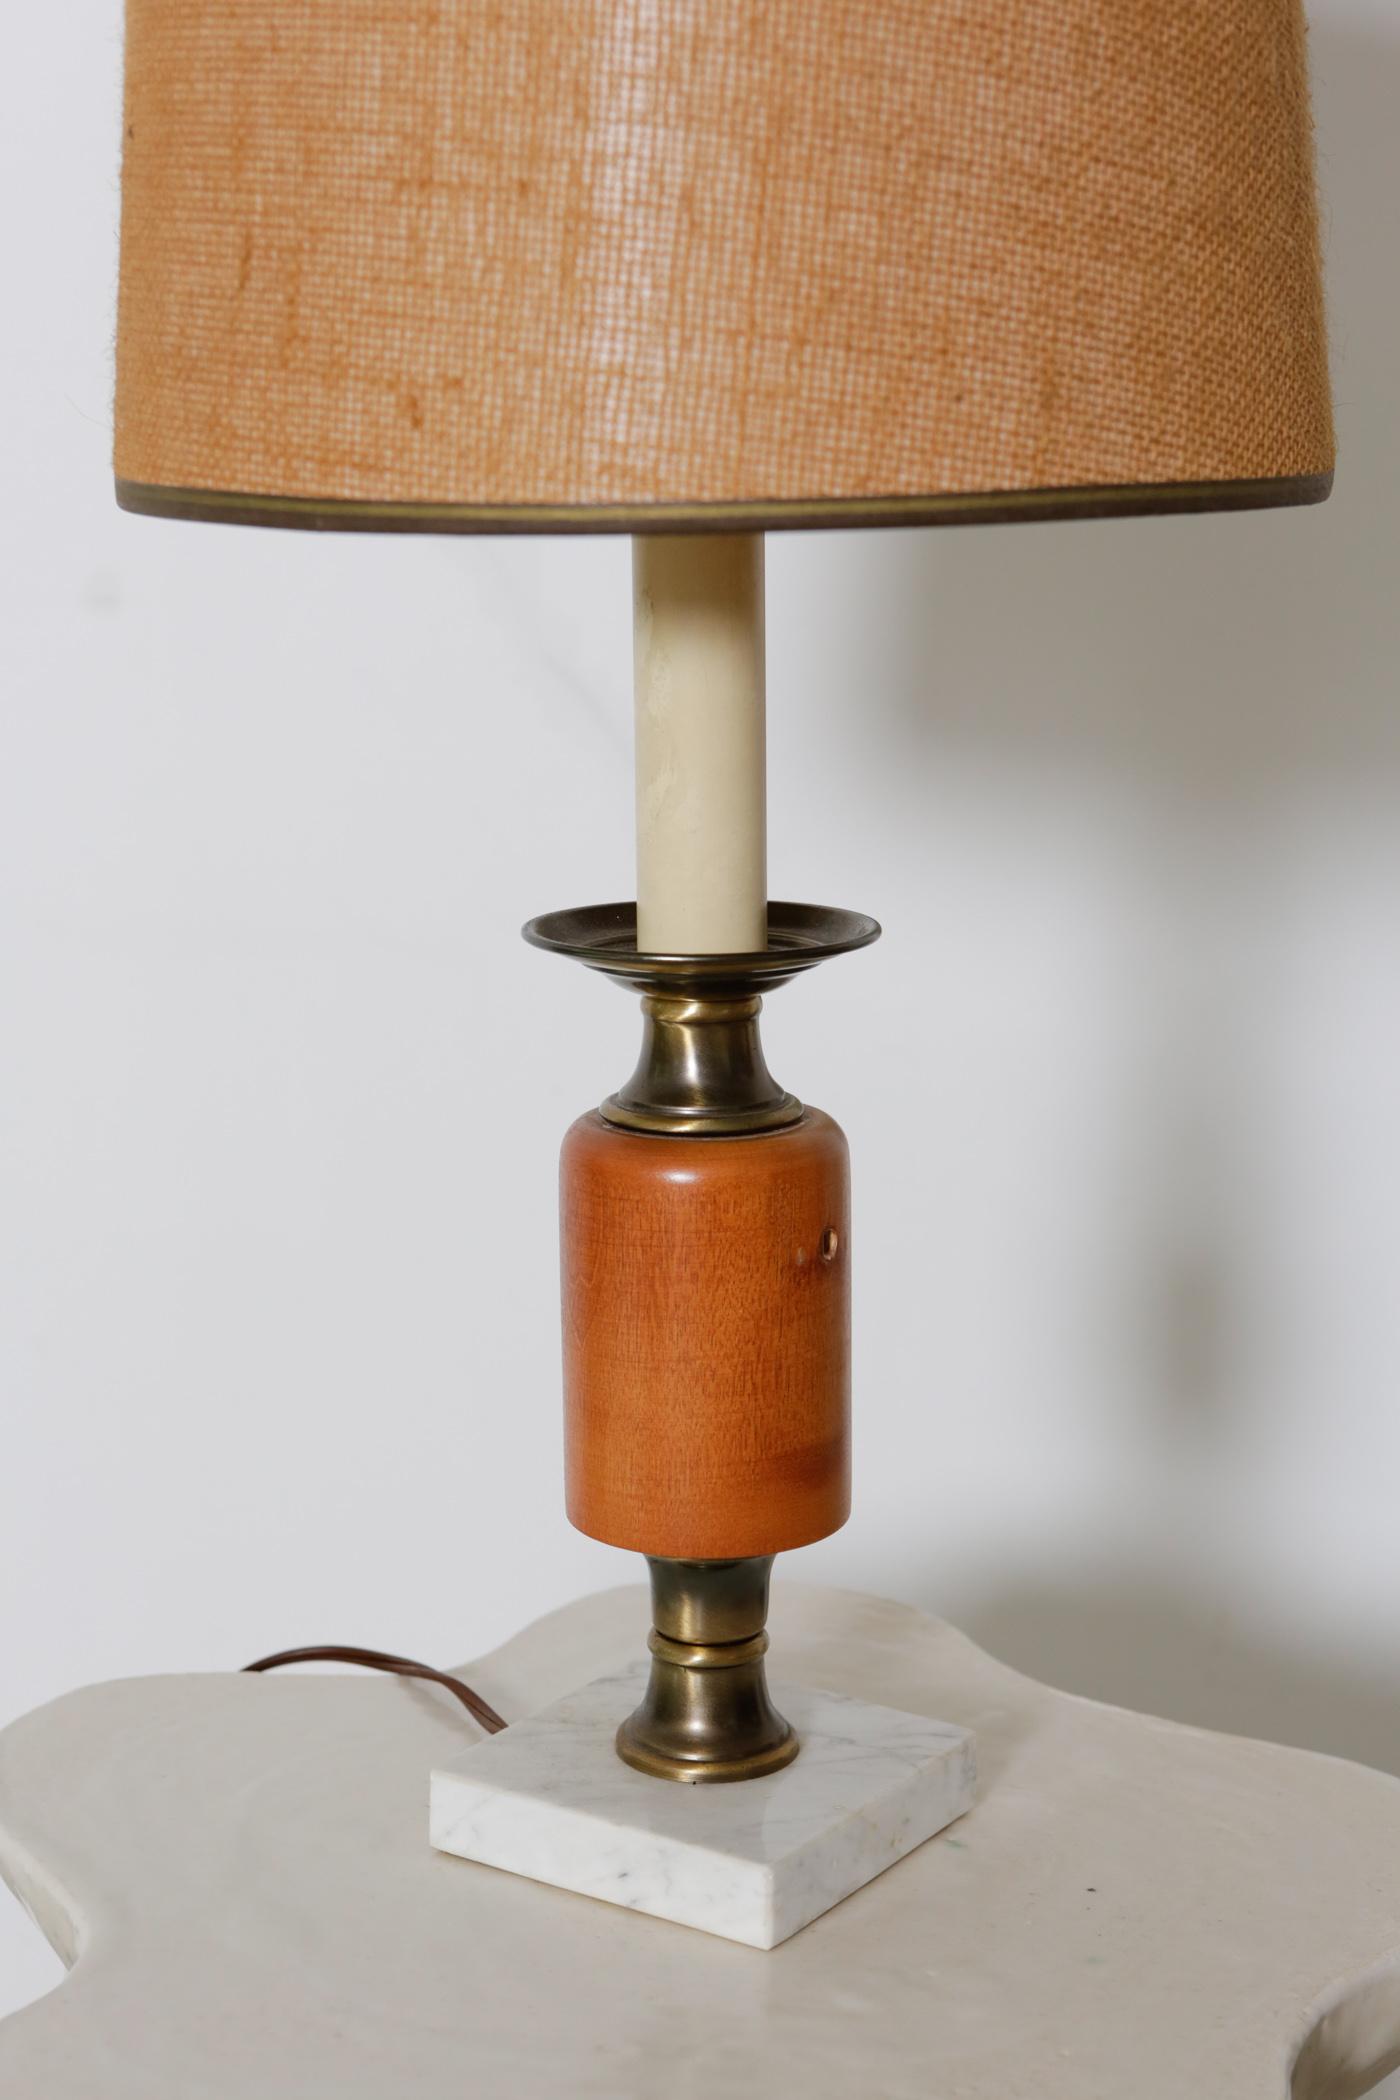 1920s Marble, Wood, and Brass Table Table Lamp In Good Condition For Sale In Armonk, NY